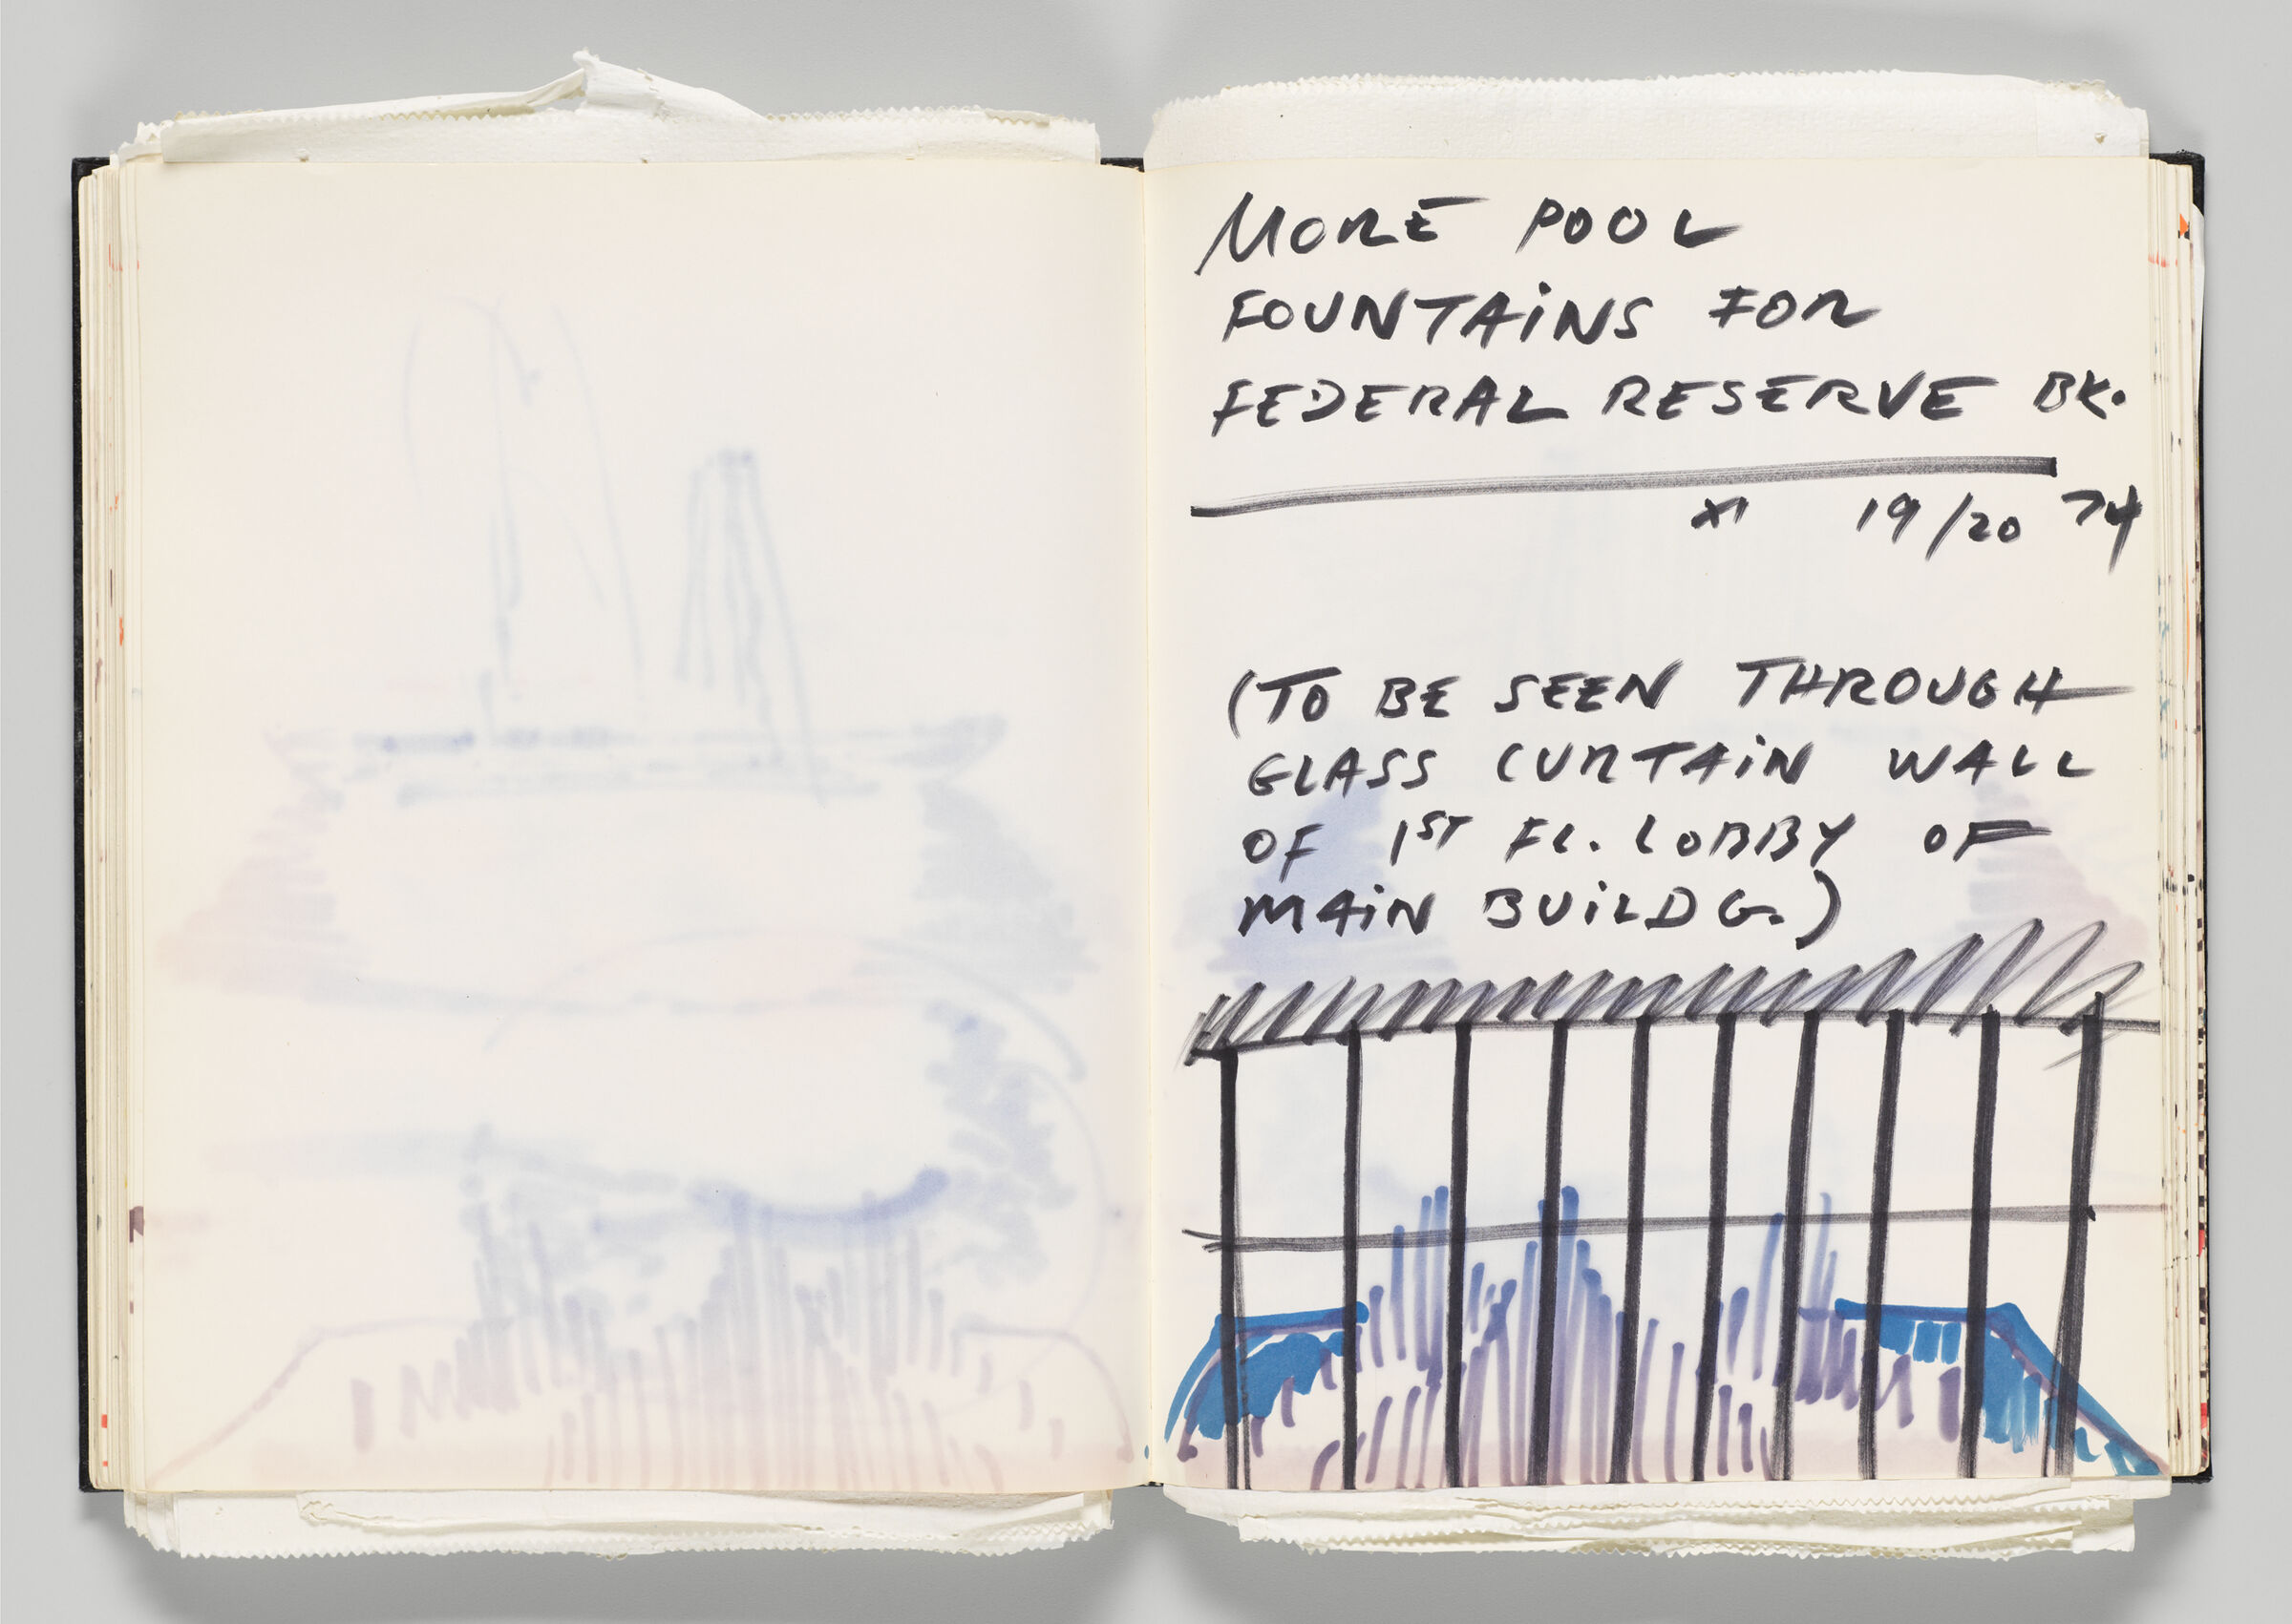 Untitled (Color Transfer, Left Page); Untitled (Notes And Pool Fountain Design With Color Transfer, Right Page)